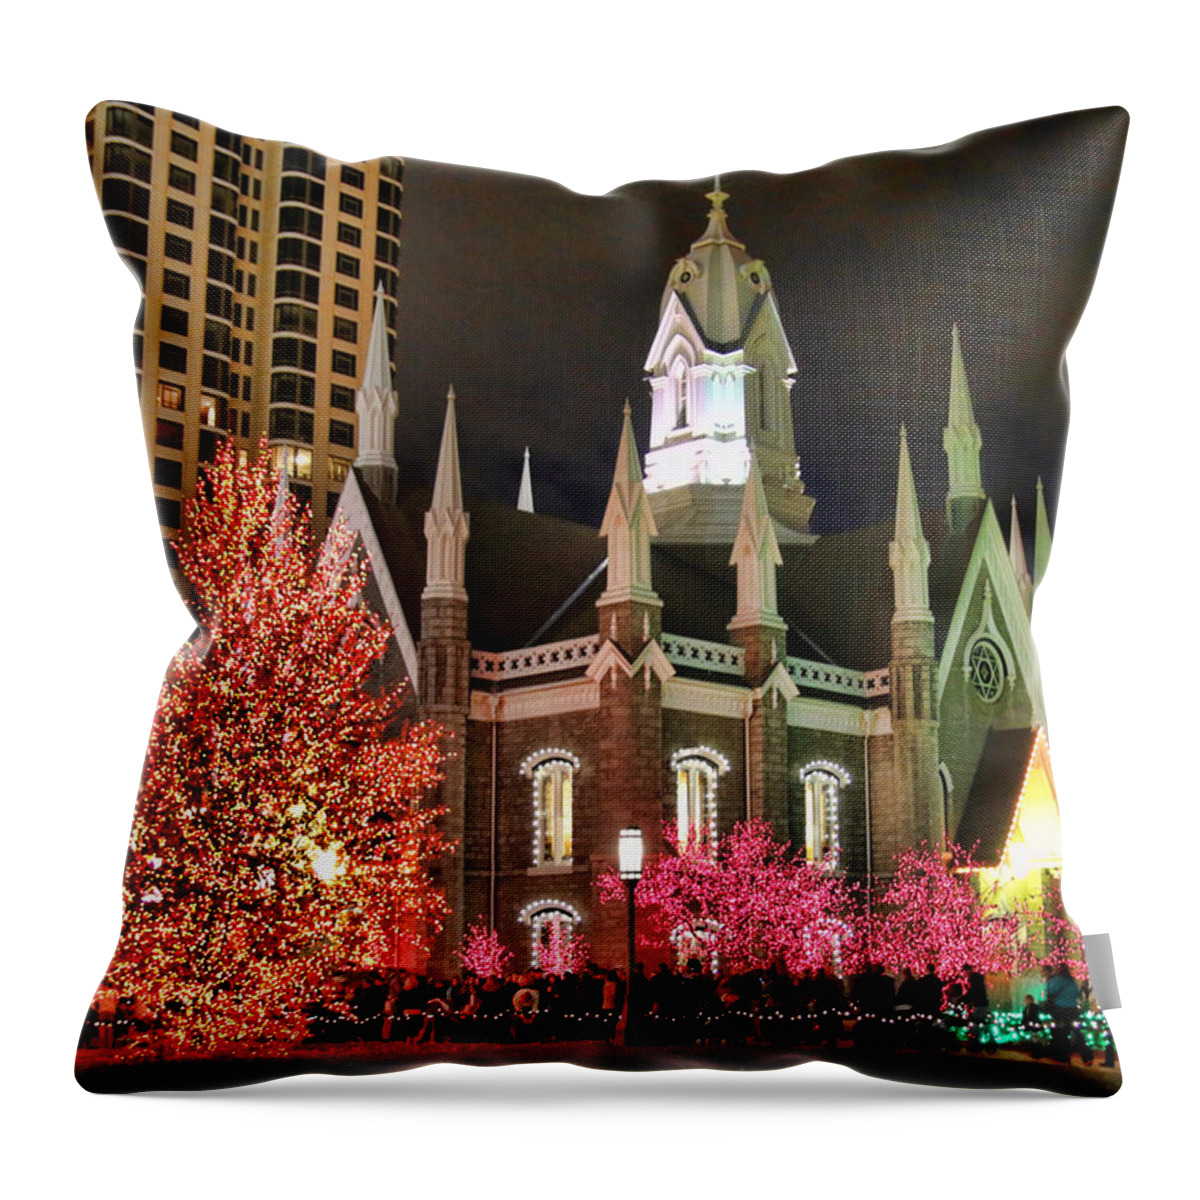 Salt Lake Temple Throw Pillow featuring the photograph Salt Lake Temple - 3 by Ely Arsha